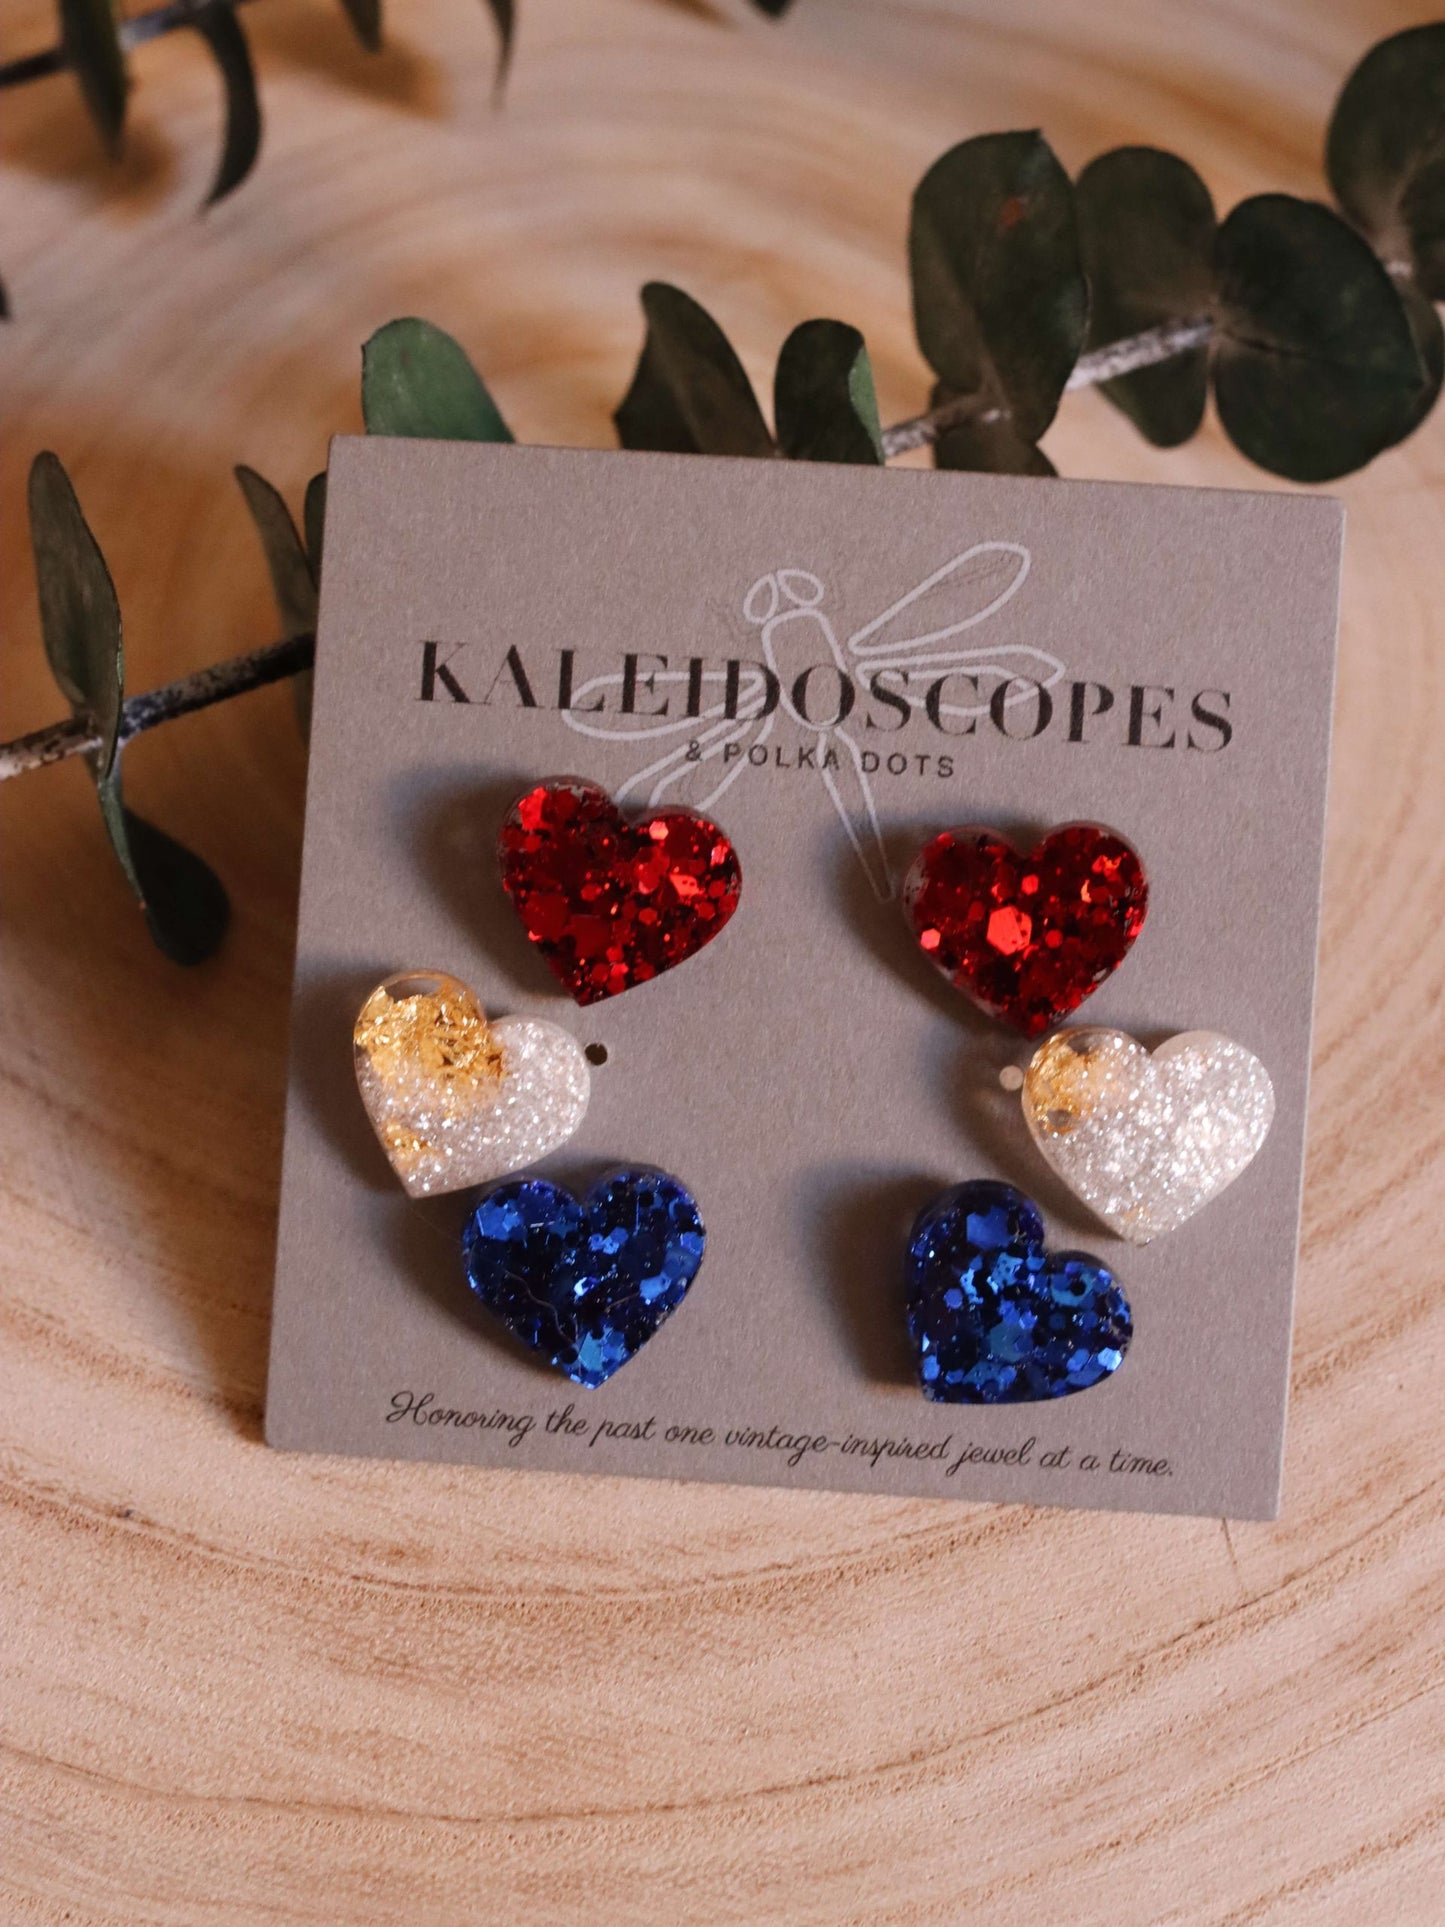 patriotic-heart-stud-earrings---red-white-and-blue-glittery-jewelry---kaleidoscopes-and-polka-dots